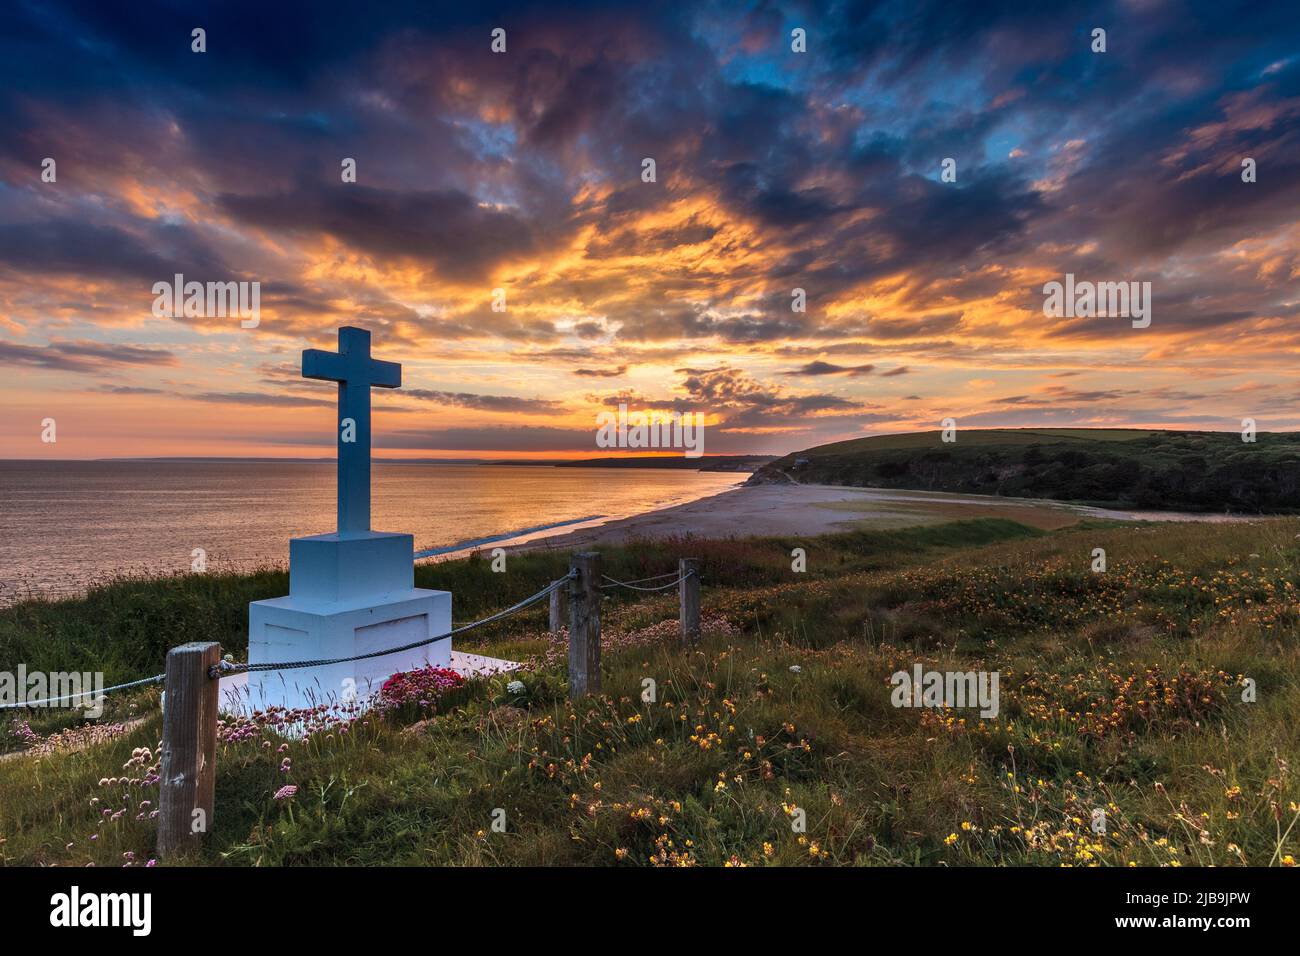 A landscape of the Anson Memorial overlooking Loe Bar in Cornwall at Sunset. In the distance Porthleven can just be glimpsed. Stock Photo